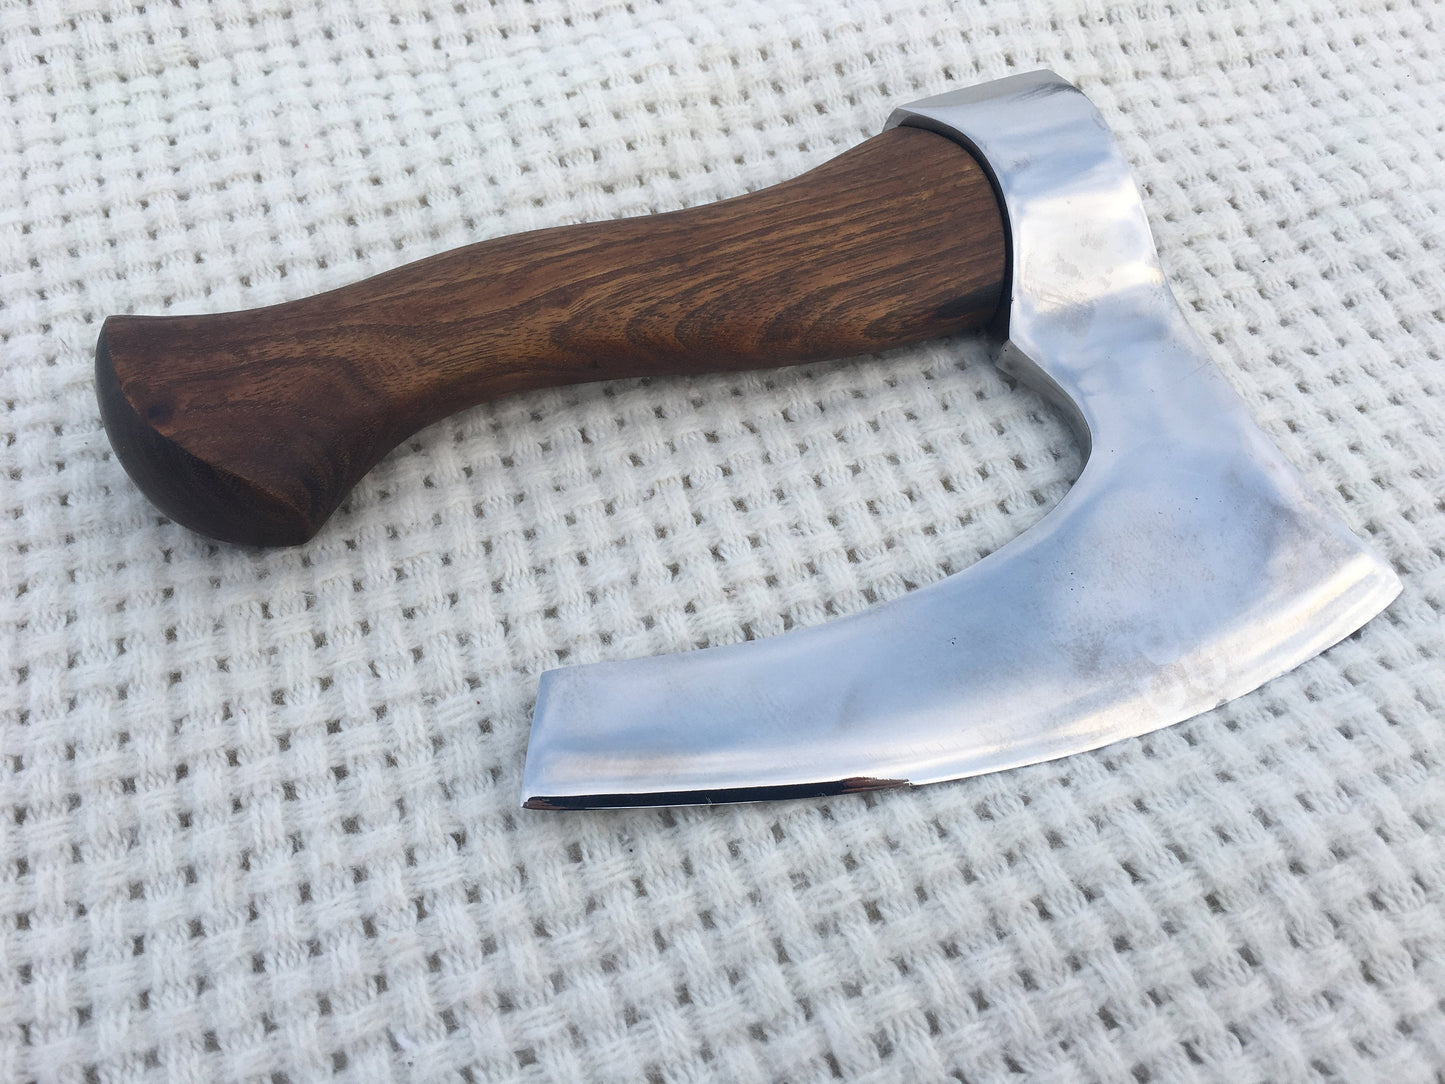 Mens accessories, mens axe, mens valentines gifts, mens clothing, viking axe, hatchet, axe gift, tool lover, mens decor, hand tools, axes